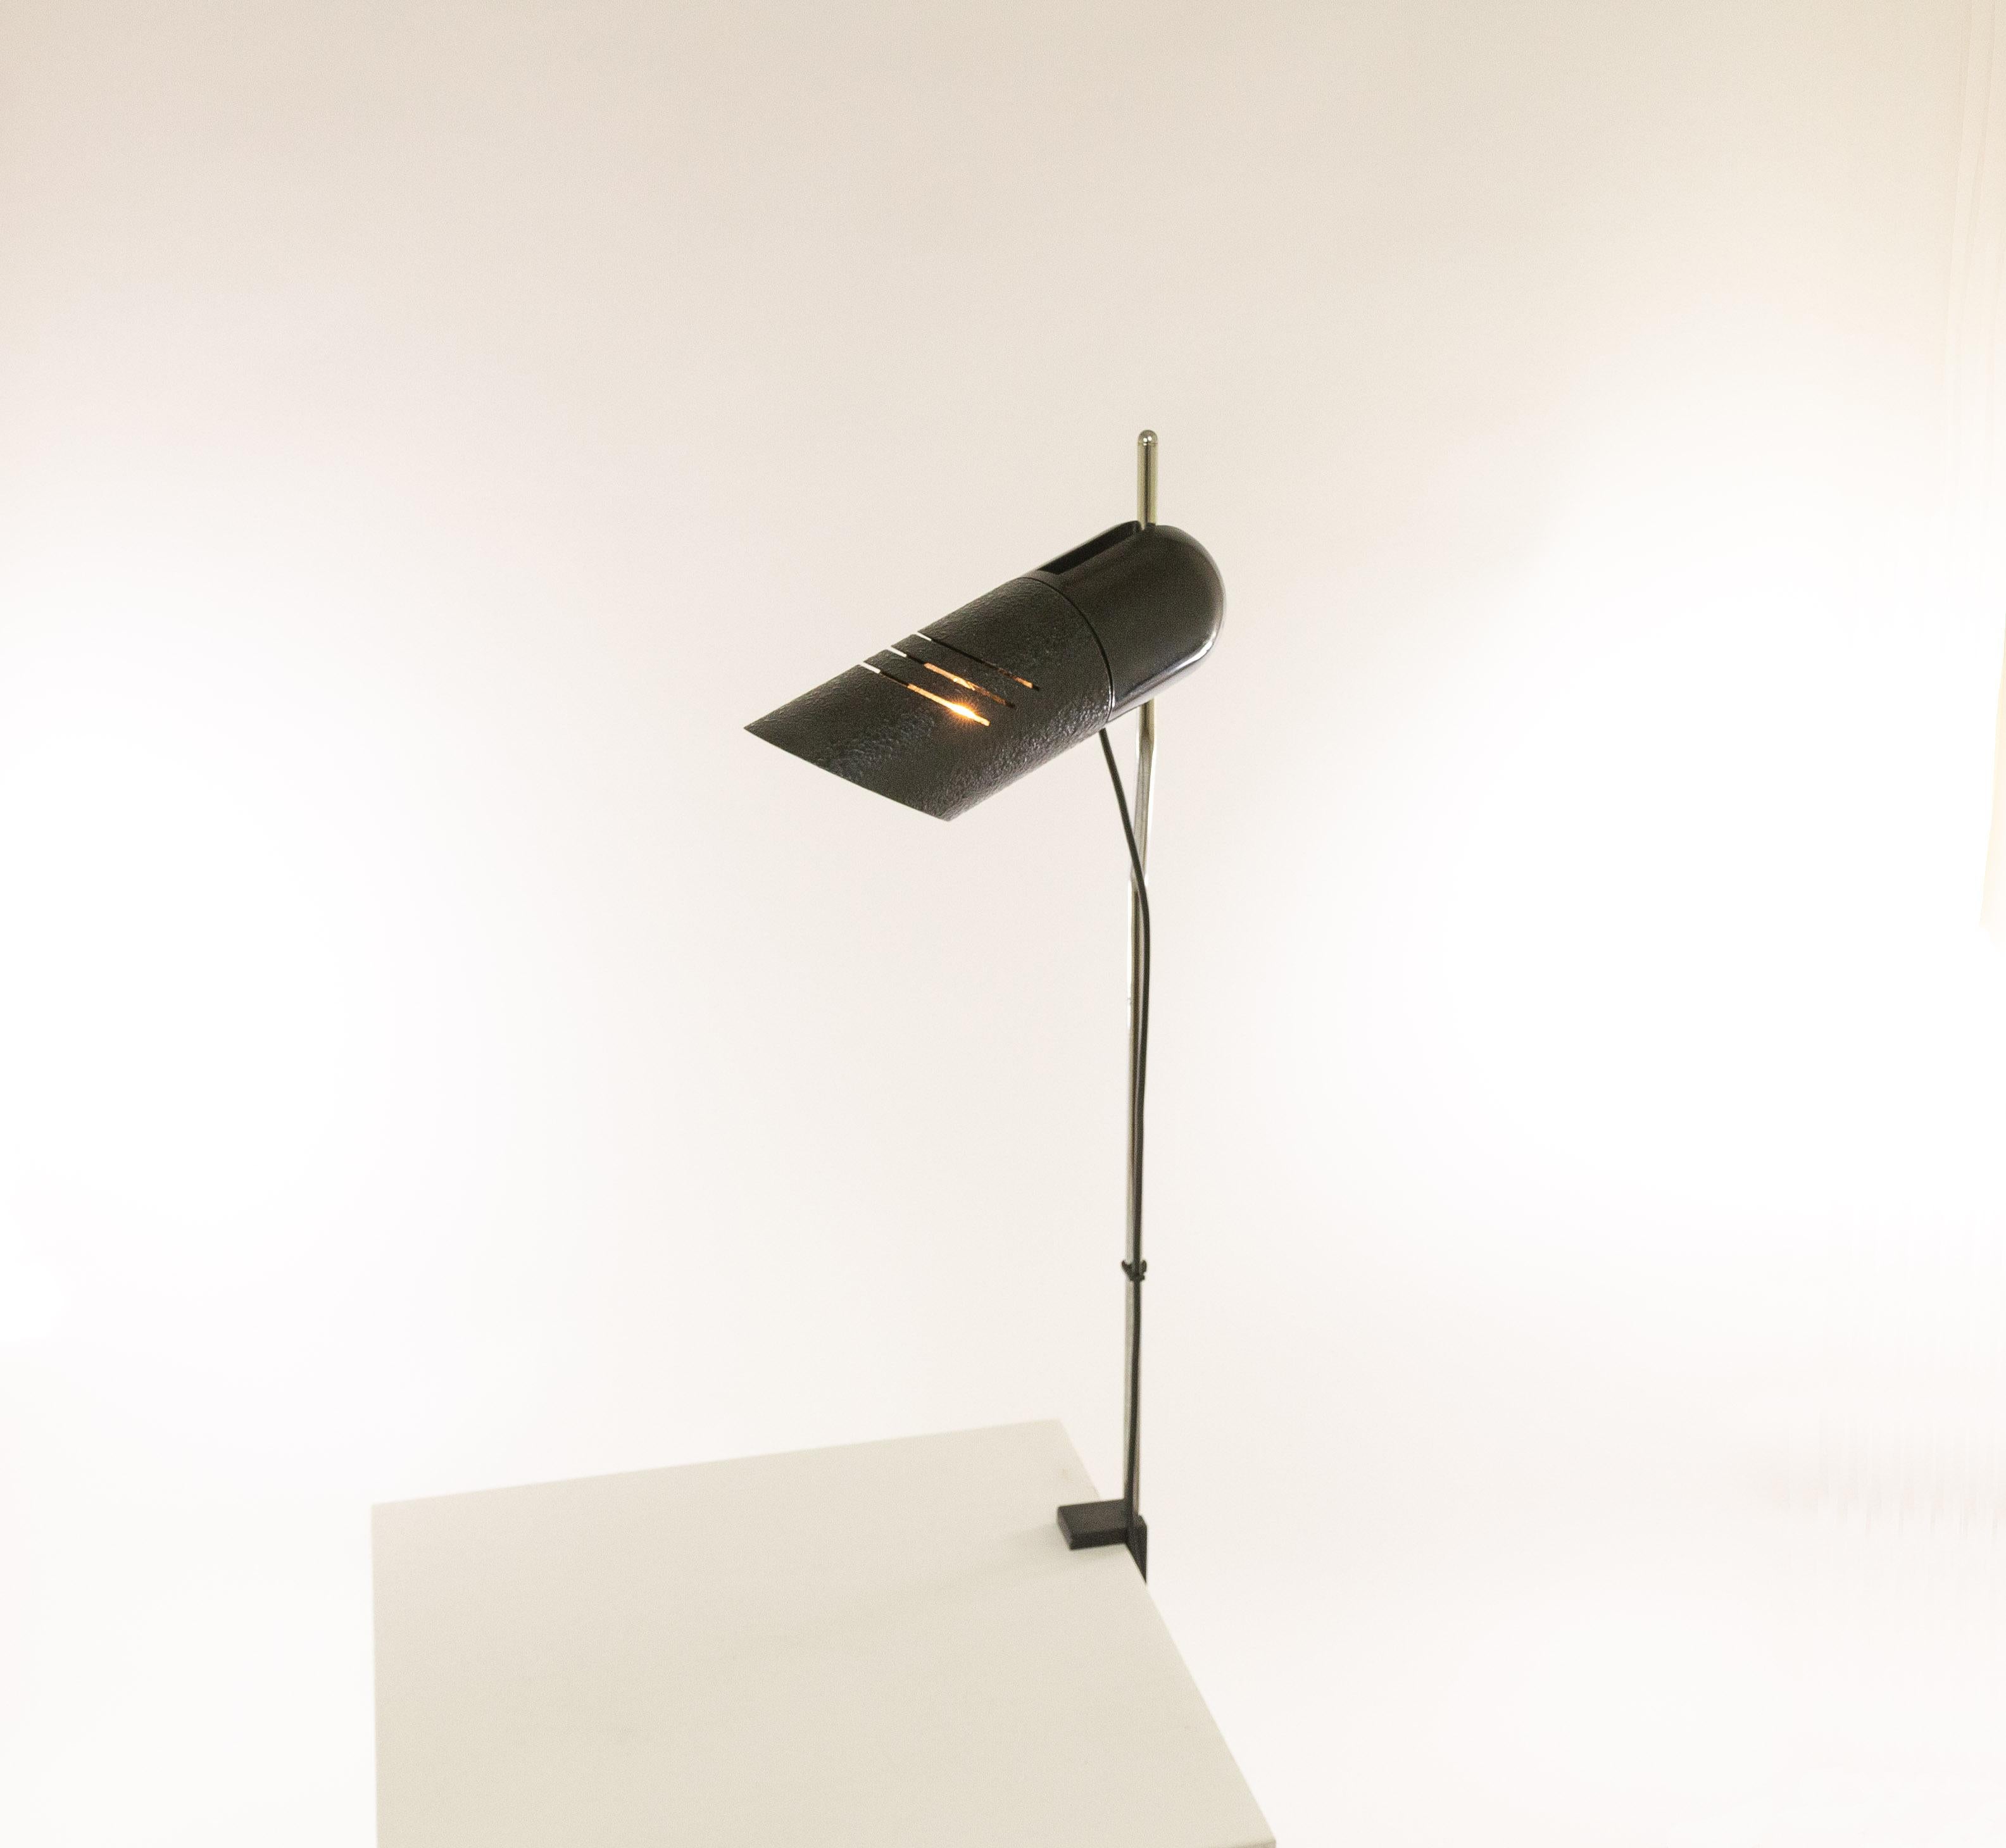 Adjustable table lamp Galdino by Carlo Urbinati for Harvey Guzzini, 1972.

Galdino has been produced in various versions, as a table lamp, wall lamp and as a floor lamp (with one and with two spots). This is the rare clamp lamp which can by